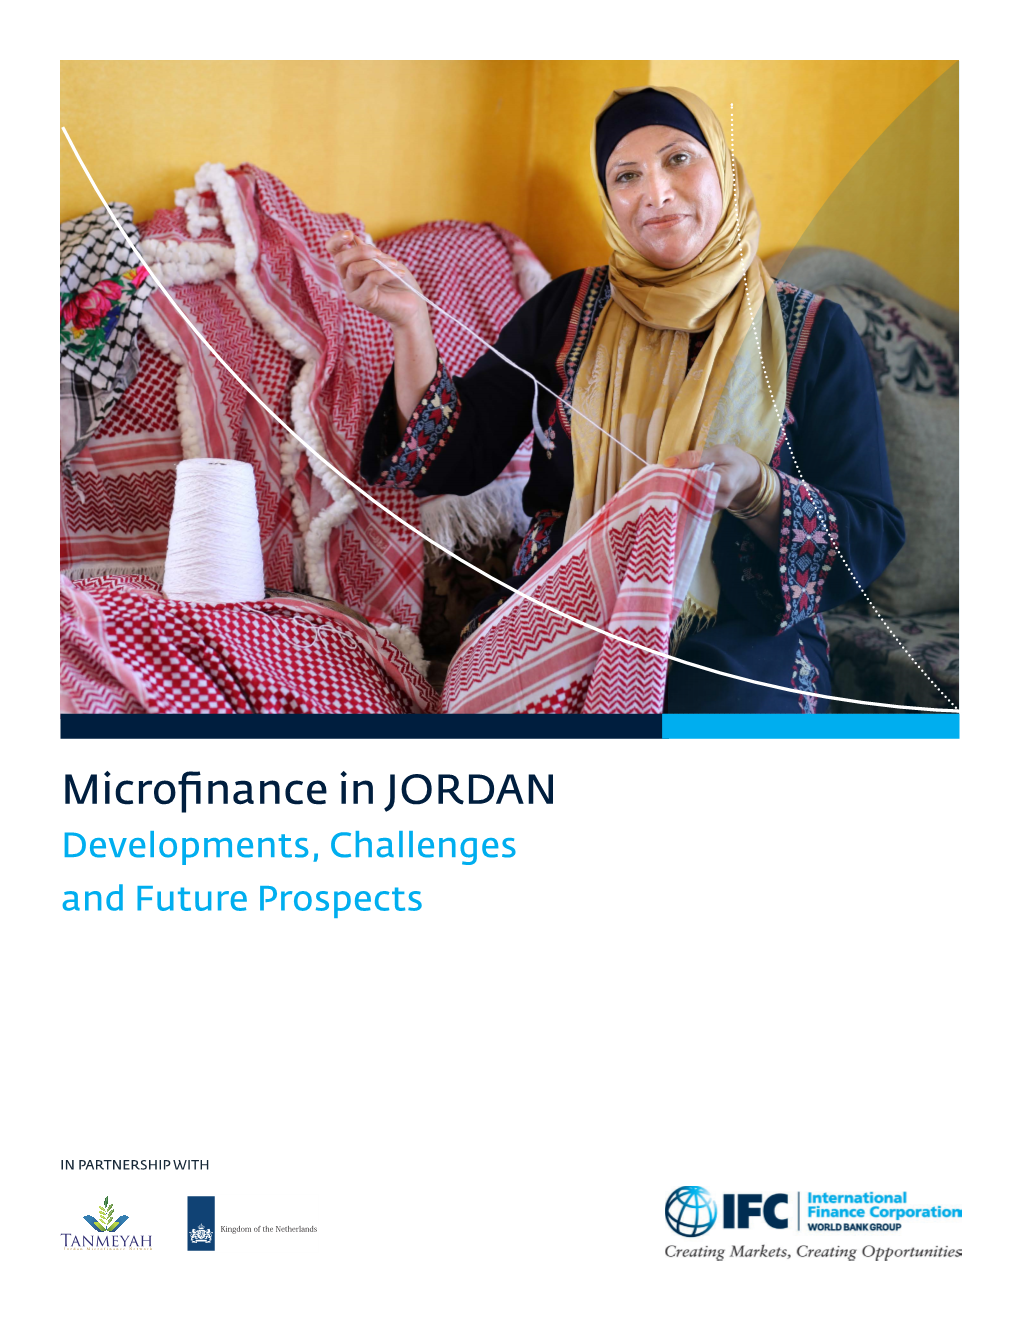 Microfinance in Jordan: Developments, Challenges, and Future Prospects